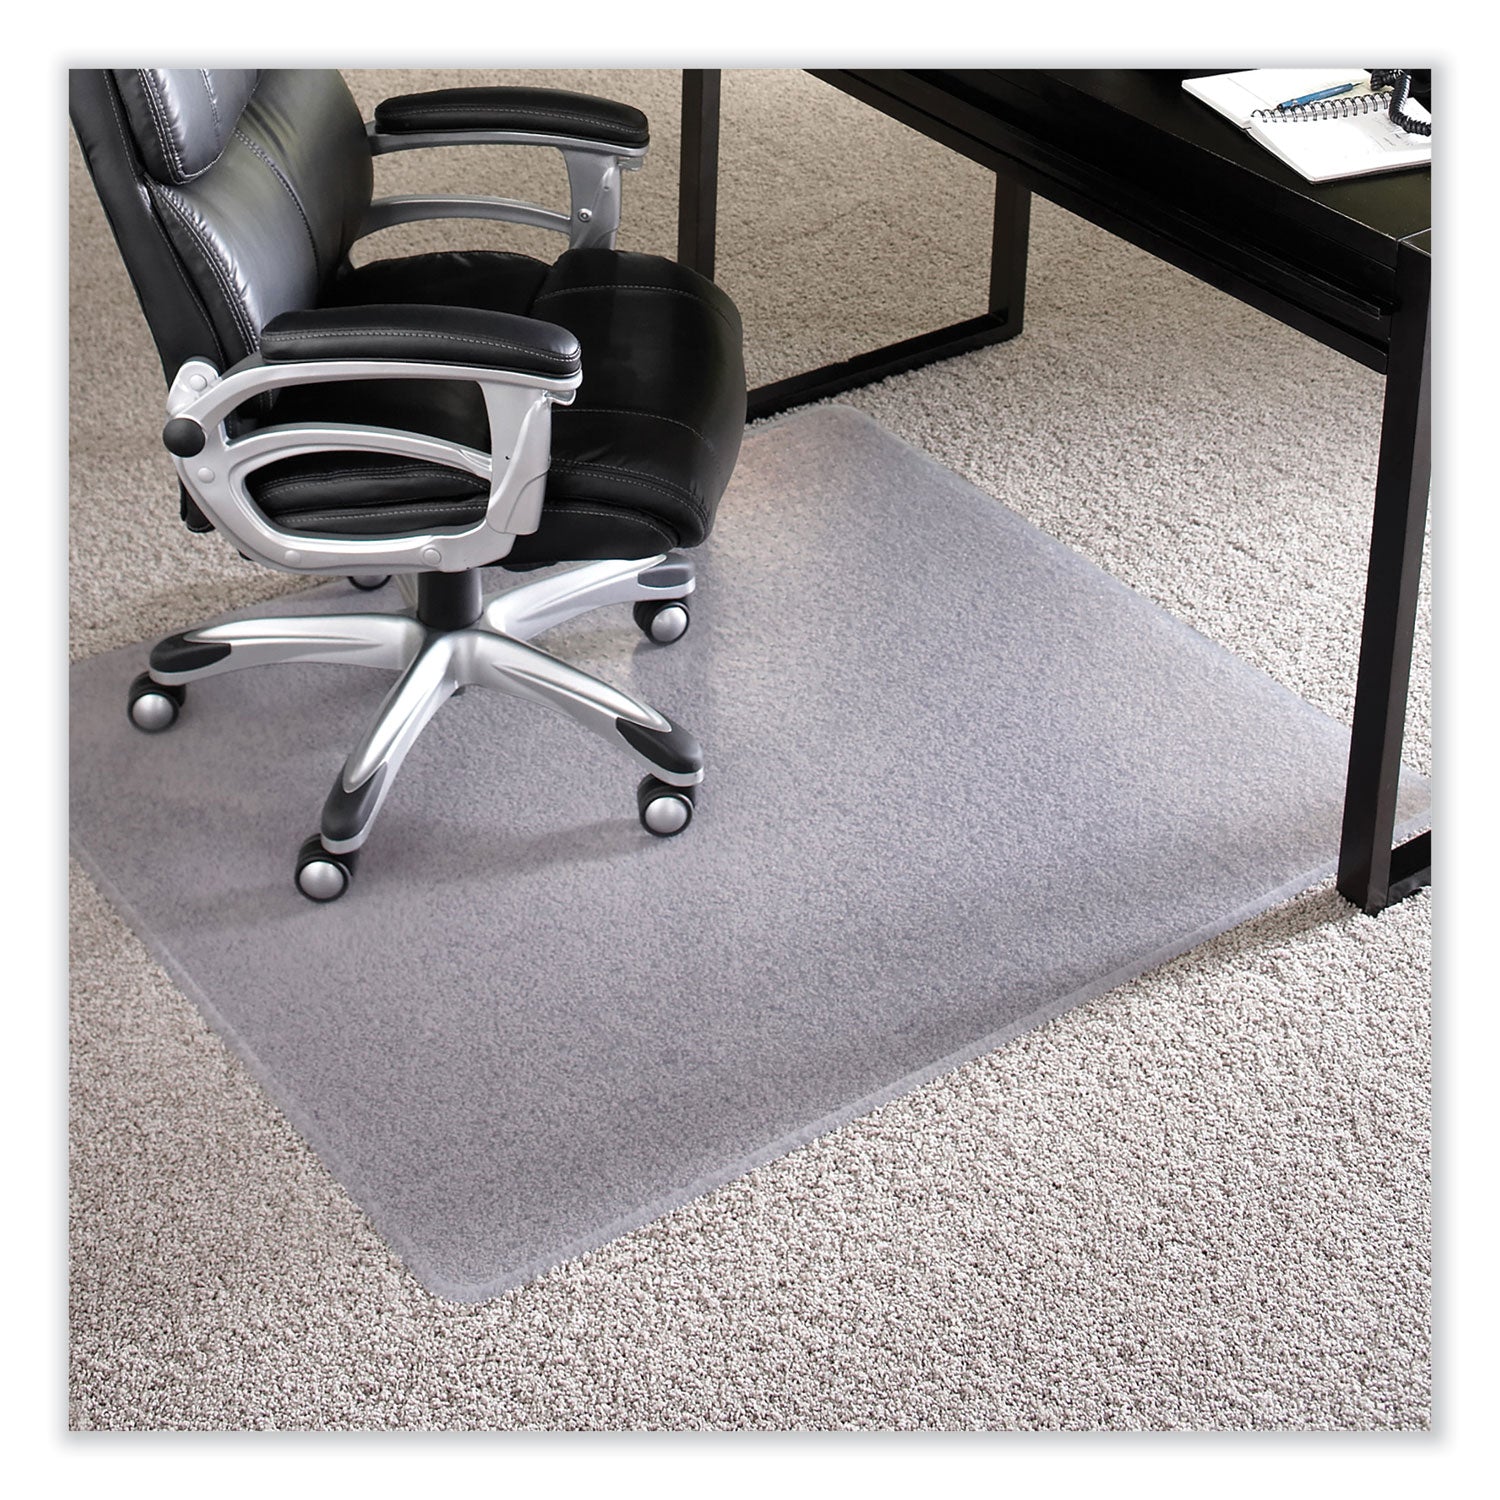 everlife-chair-mat-for-extra-high-pile-carpet-36-x-48-clear-ships-in-4-6-business-days_esr124081 - 8